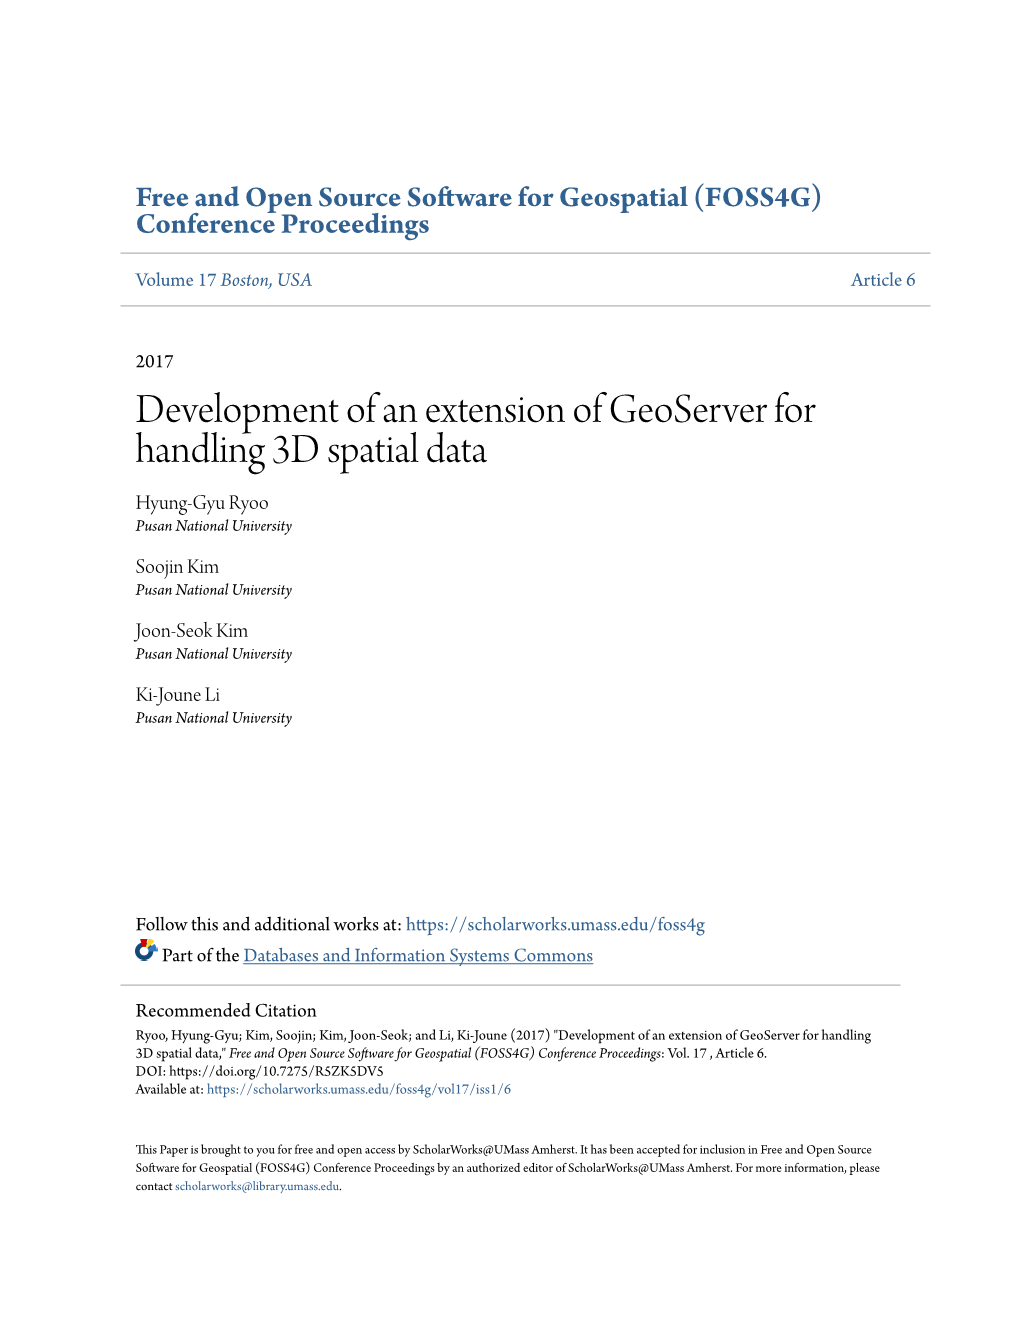 Development of an Extension of Geoserver for Handling 3D Spatial Data Hyung-Gyu Ryoo Pusan National University